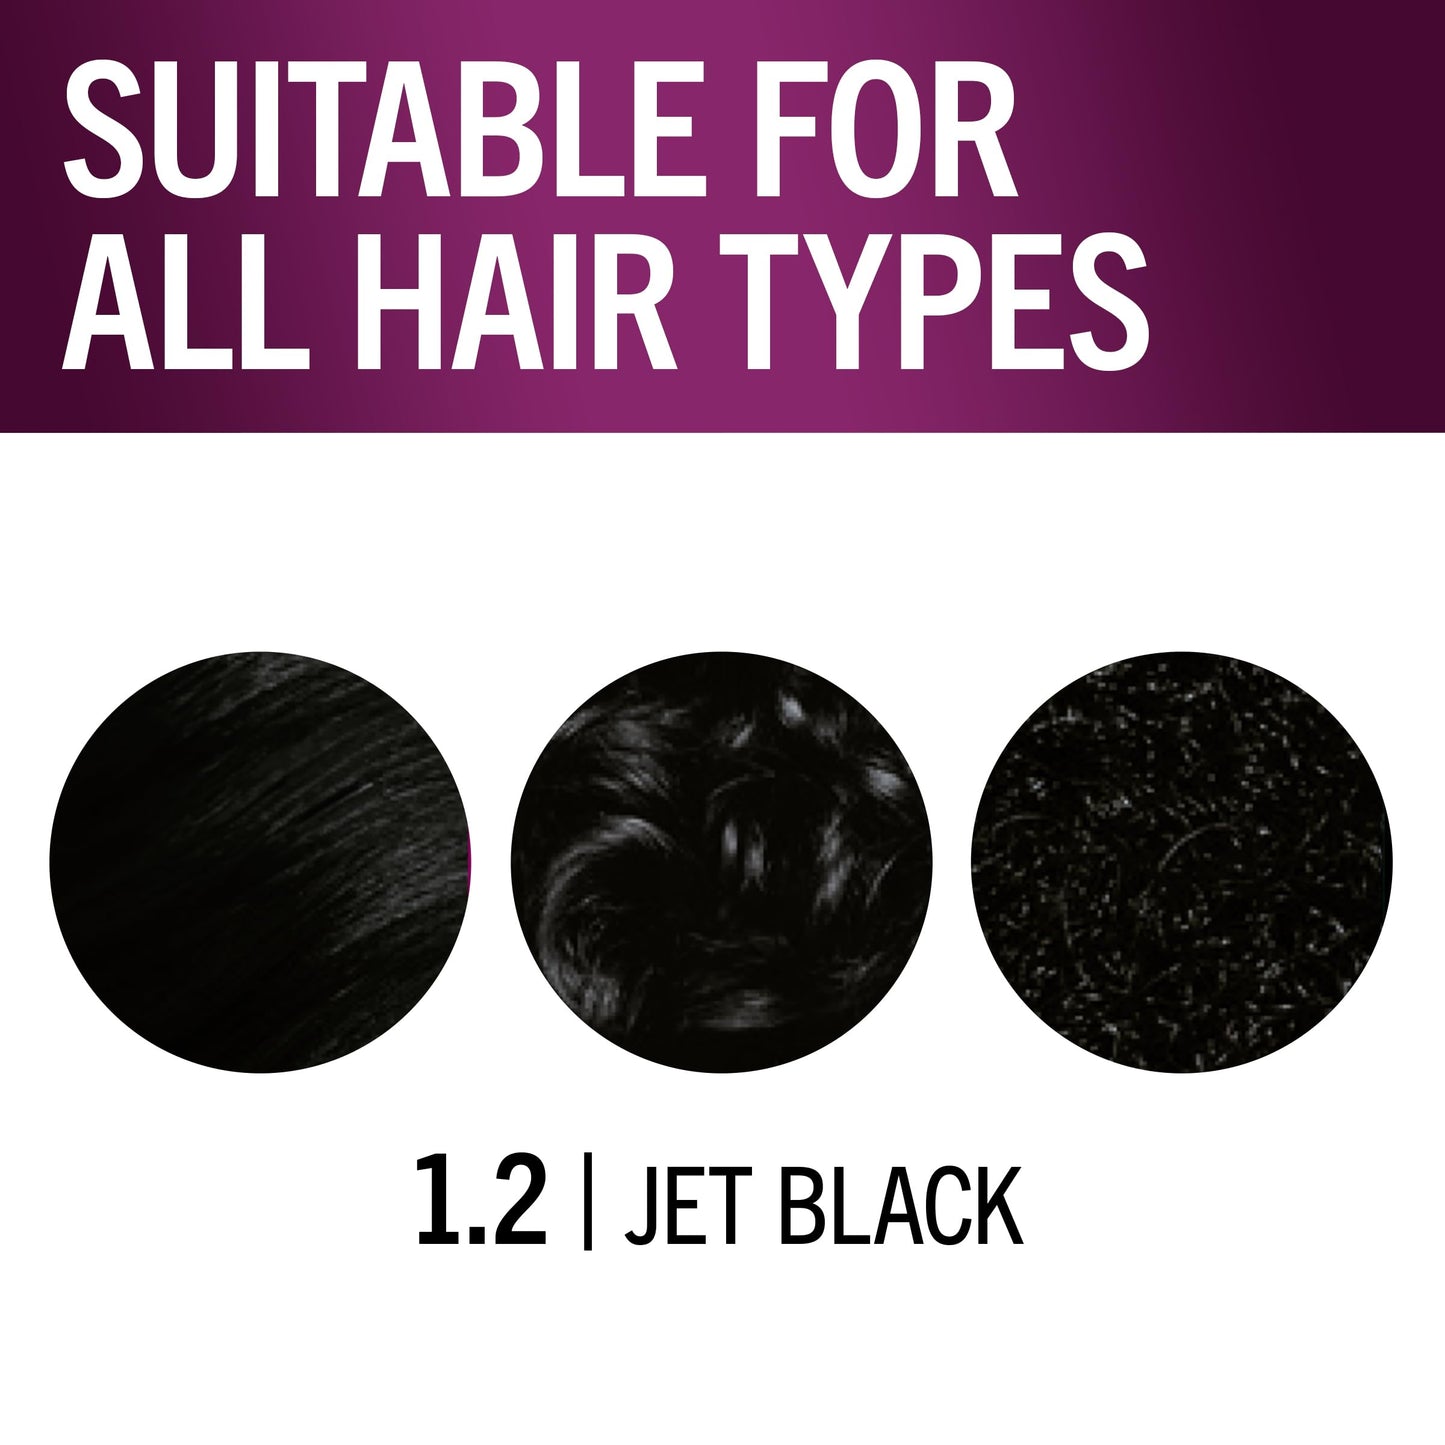 Schwarzkopf Keratin Color Permanent Hair Dye Cream, 1.2 Jet Black, 1 Application - Salon Inspired Hair Color Enriched with Keratin and Macadamia Nut Oil - Hair Dye with Pre-Serum, all Hair Types